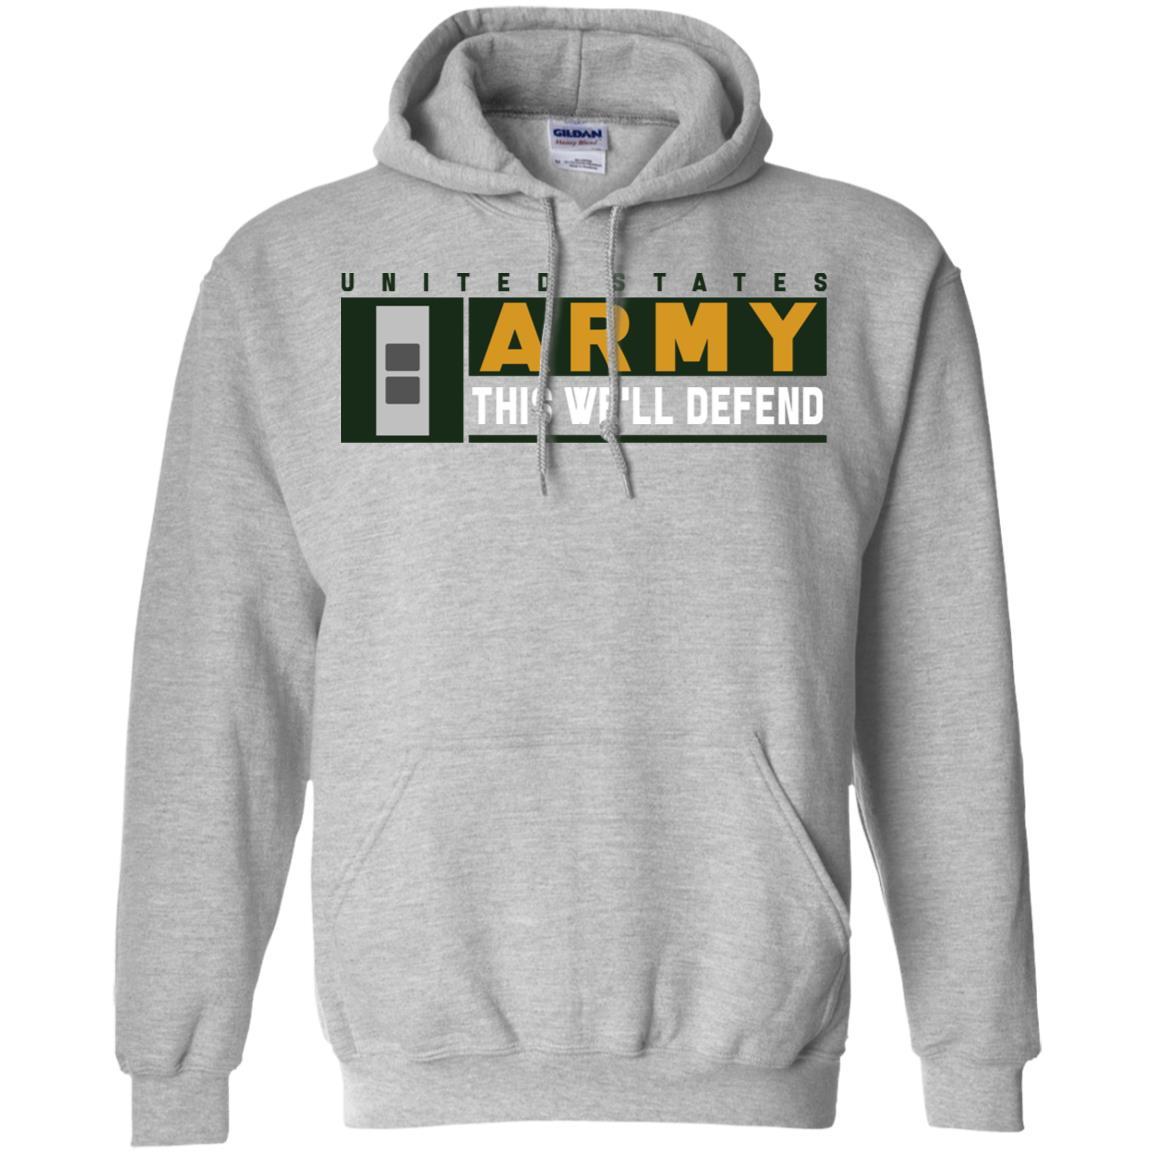 US Army W-2 This We Will Defend Long Sleeve - Pullover Hoodie-TShirt-Army-Veterans Nation